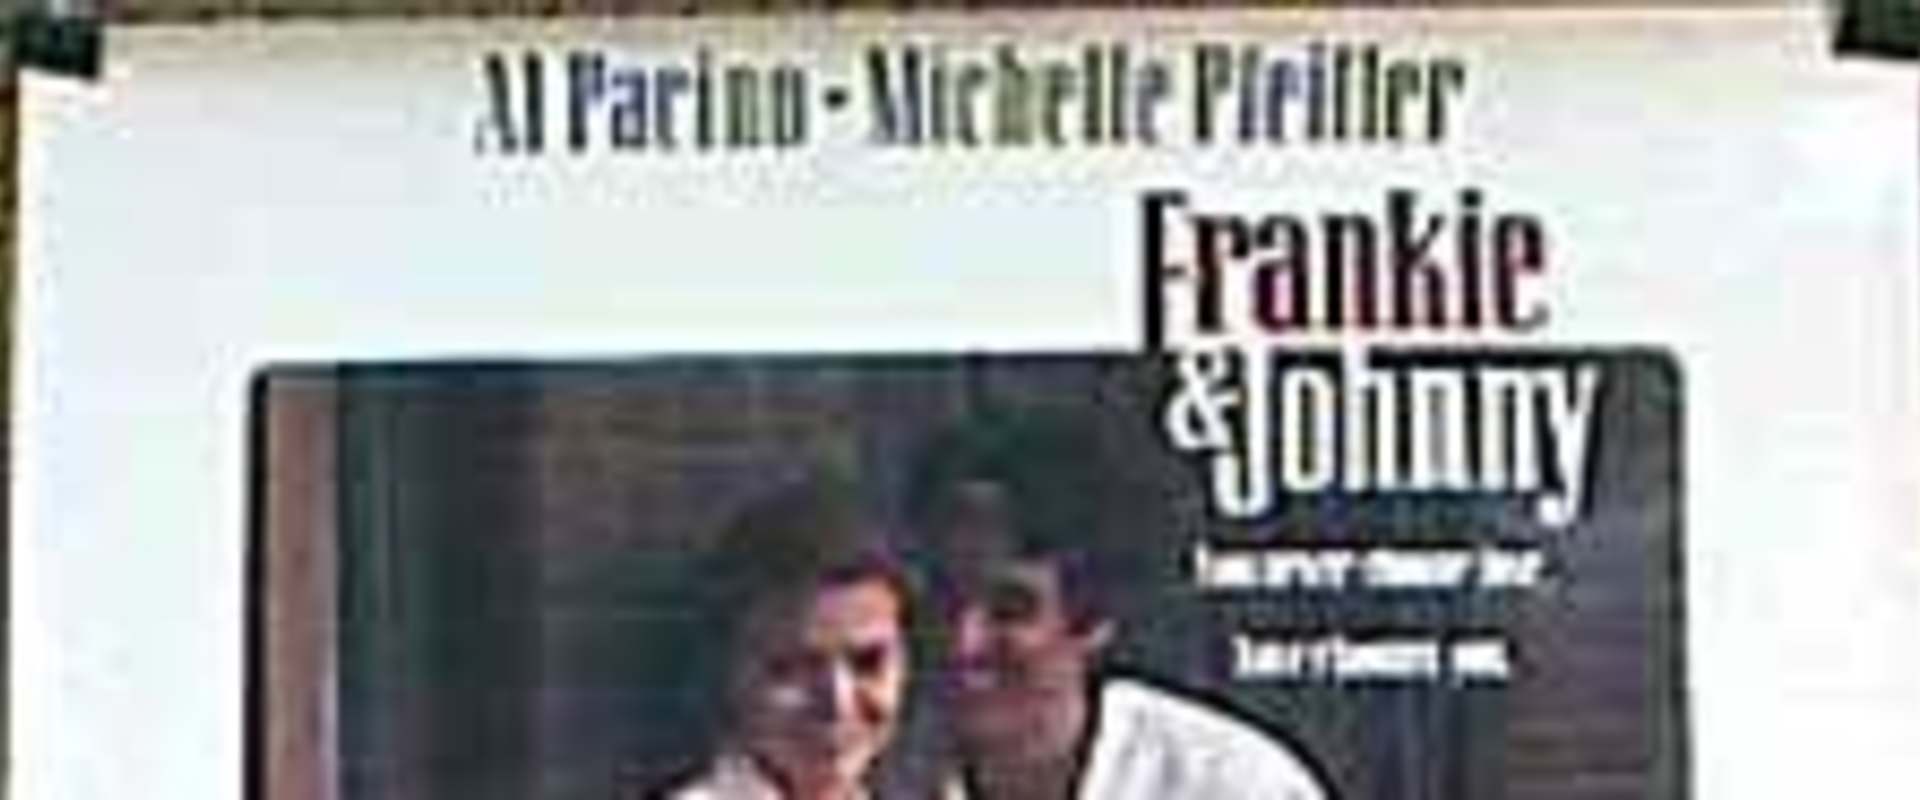 Frankie and Johnny background 1